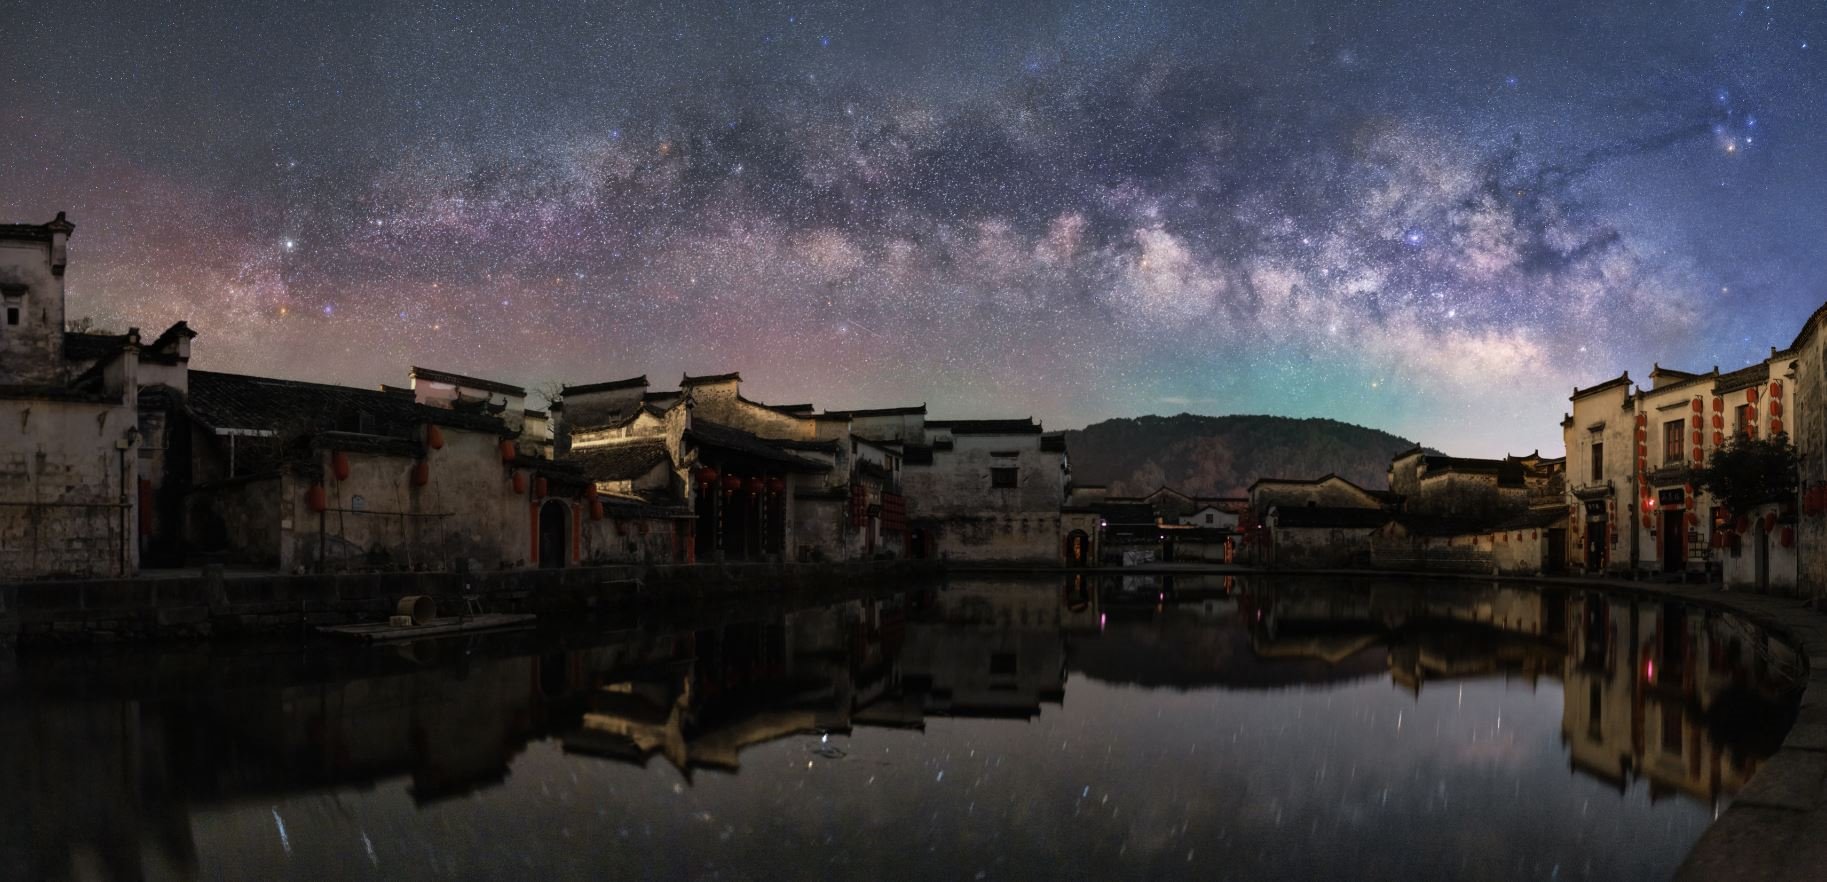 The Milky Way on the Ancient Village